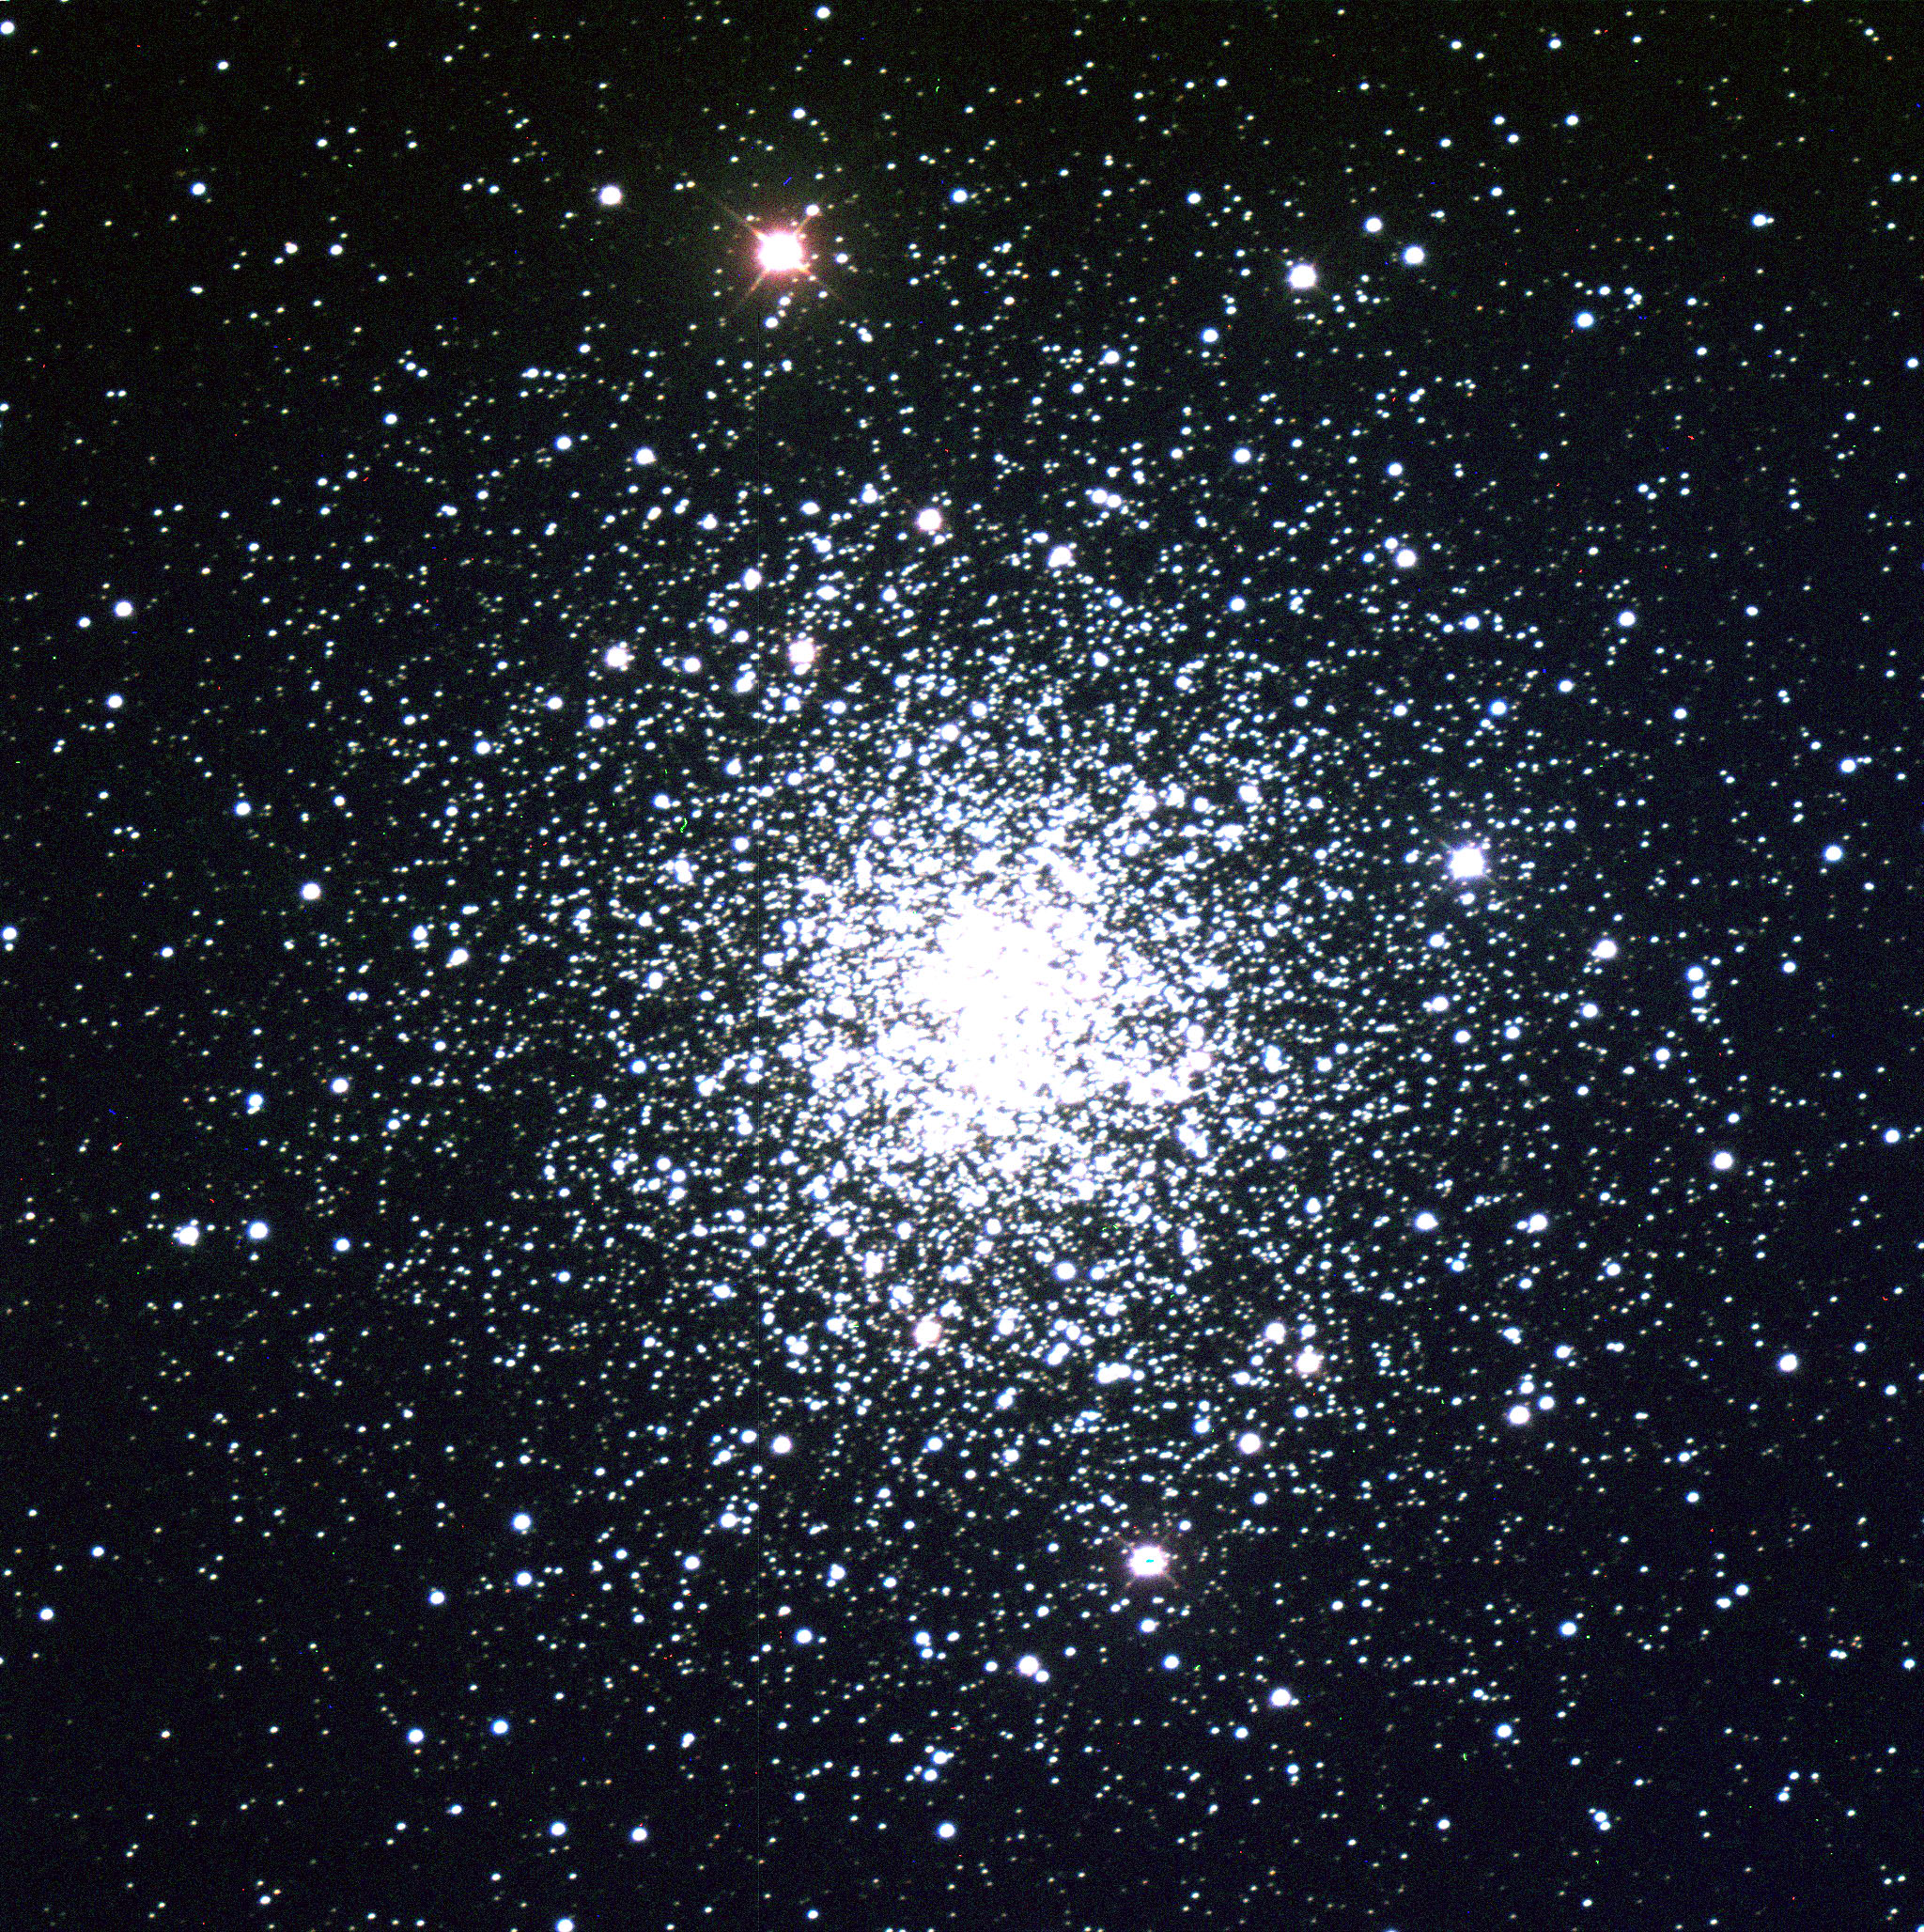 Image of Messier 107